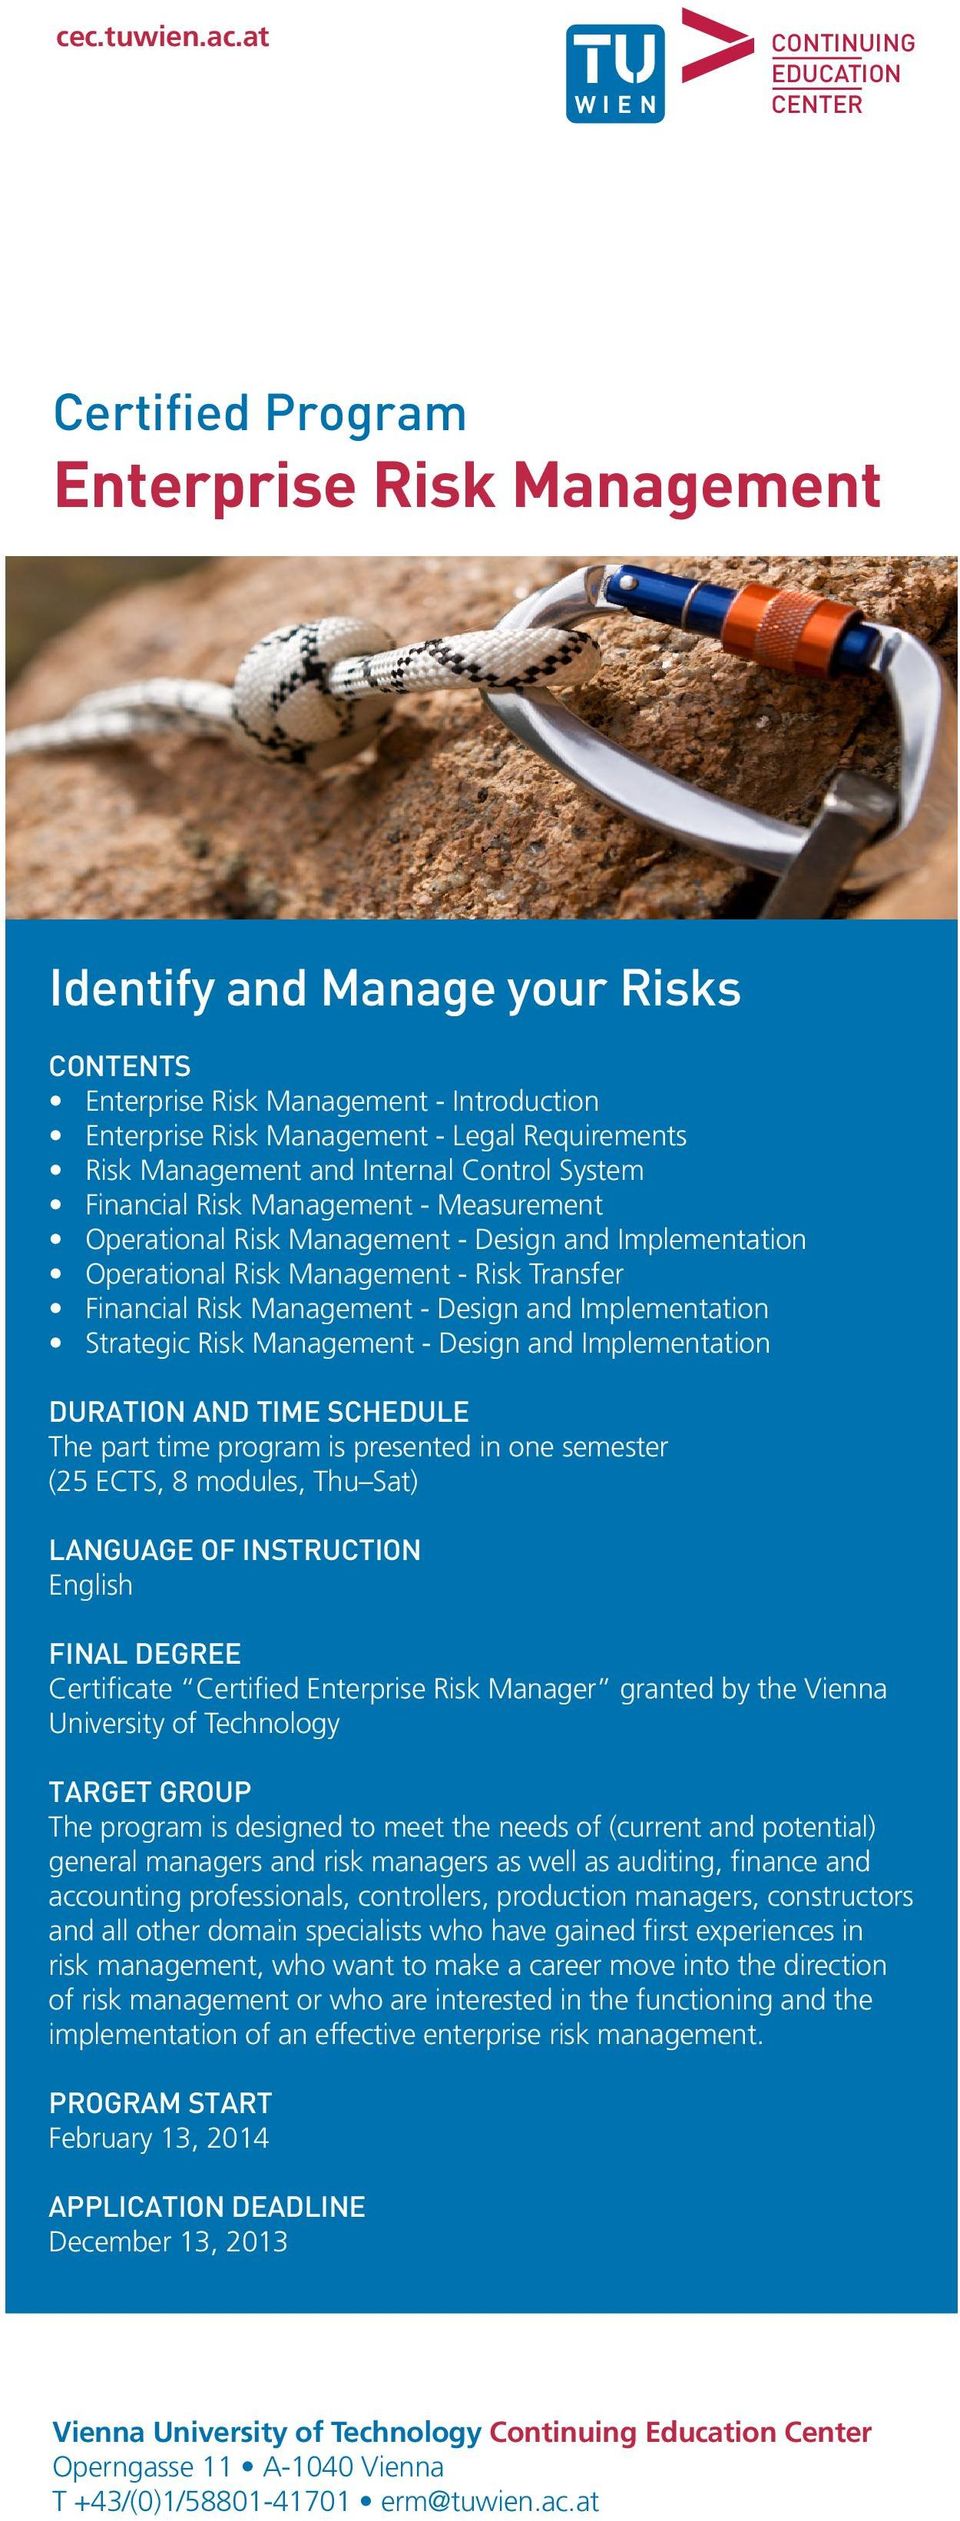 Requirements Risk Management and Internal Control System Financial Risk Management - Measurement Operational Risk Management - Design and Implementation Operational Risk Management - Risk Transfer